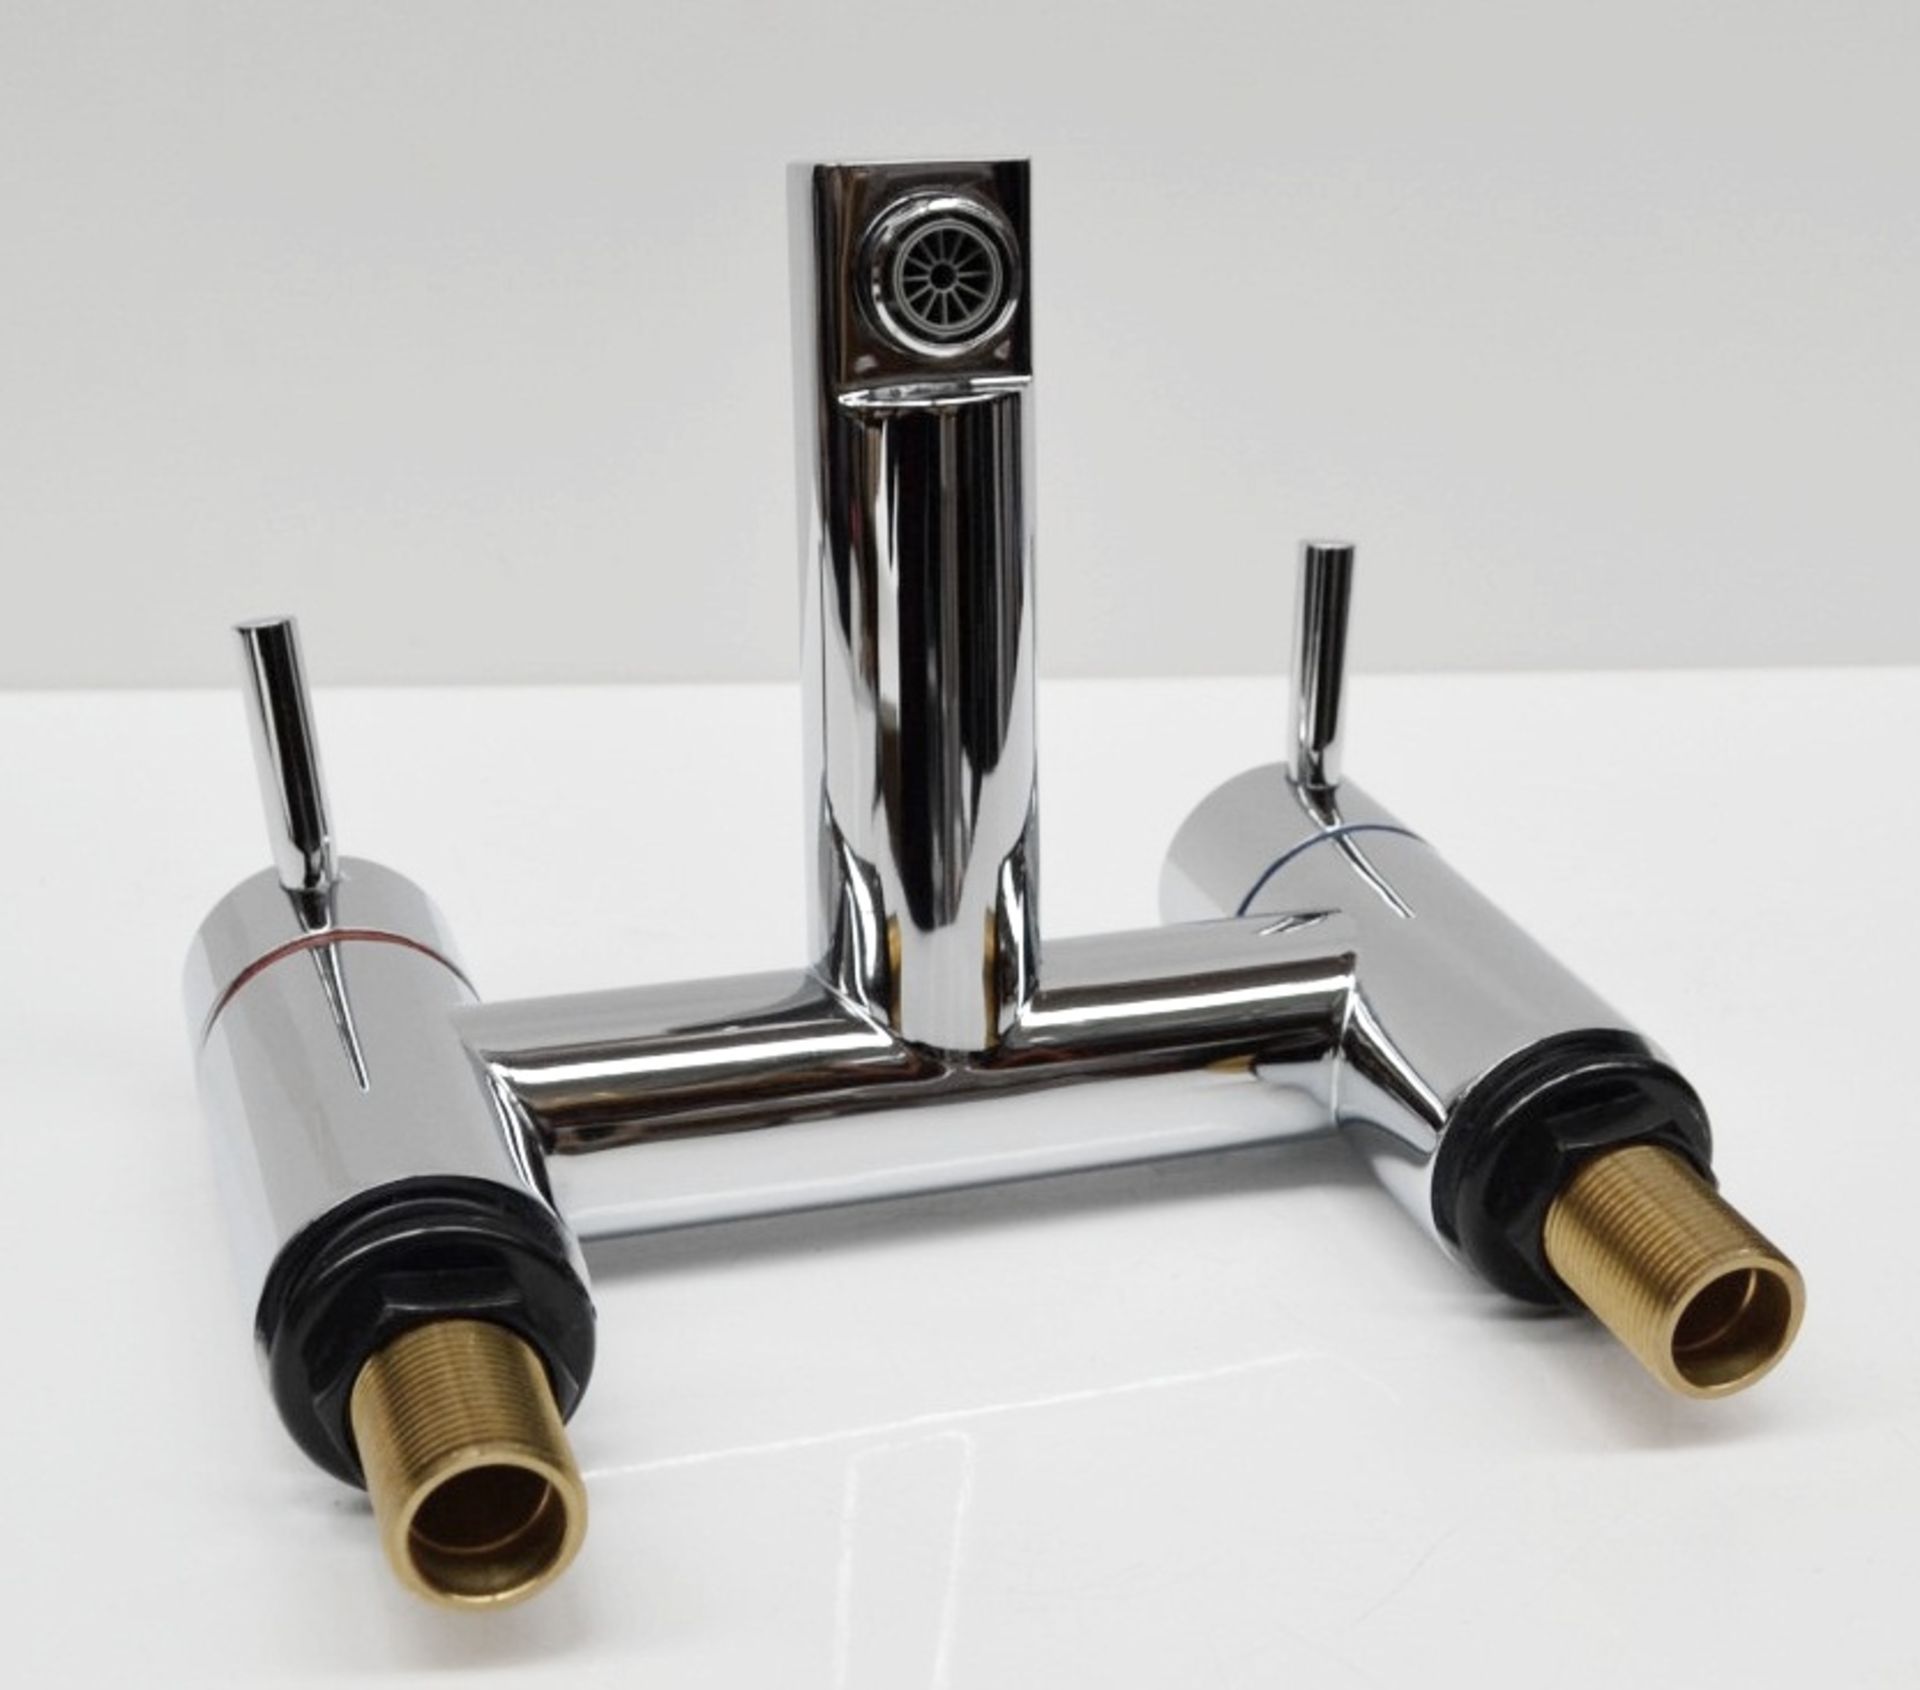 1 x Matrix Bath Mixer Tap - Featuring Modern Style With A Round Shape - Ref: MBI028 - CL190 - Unused - Image 4 of 4